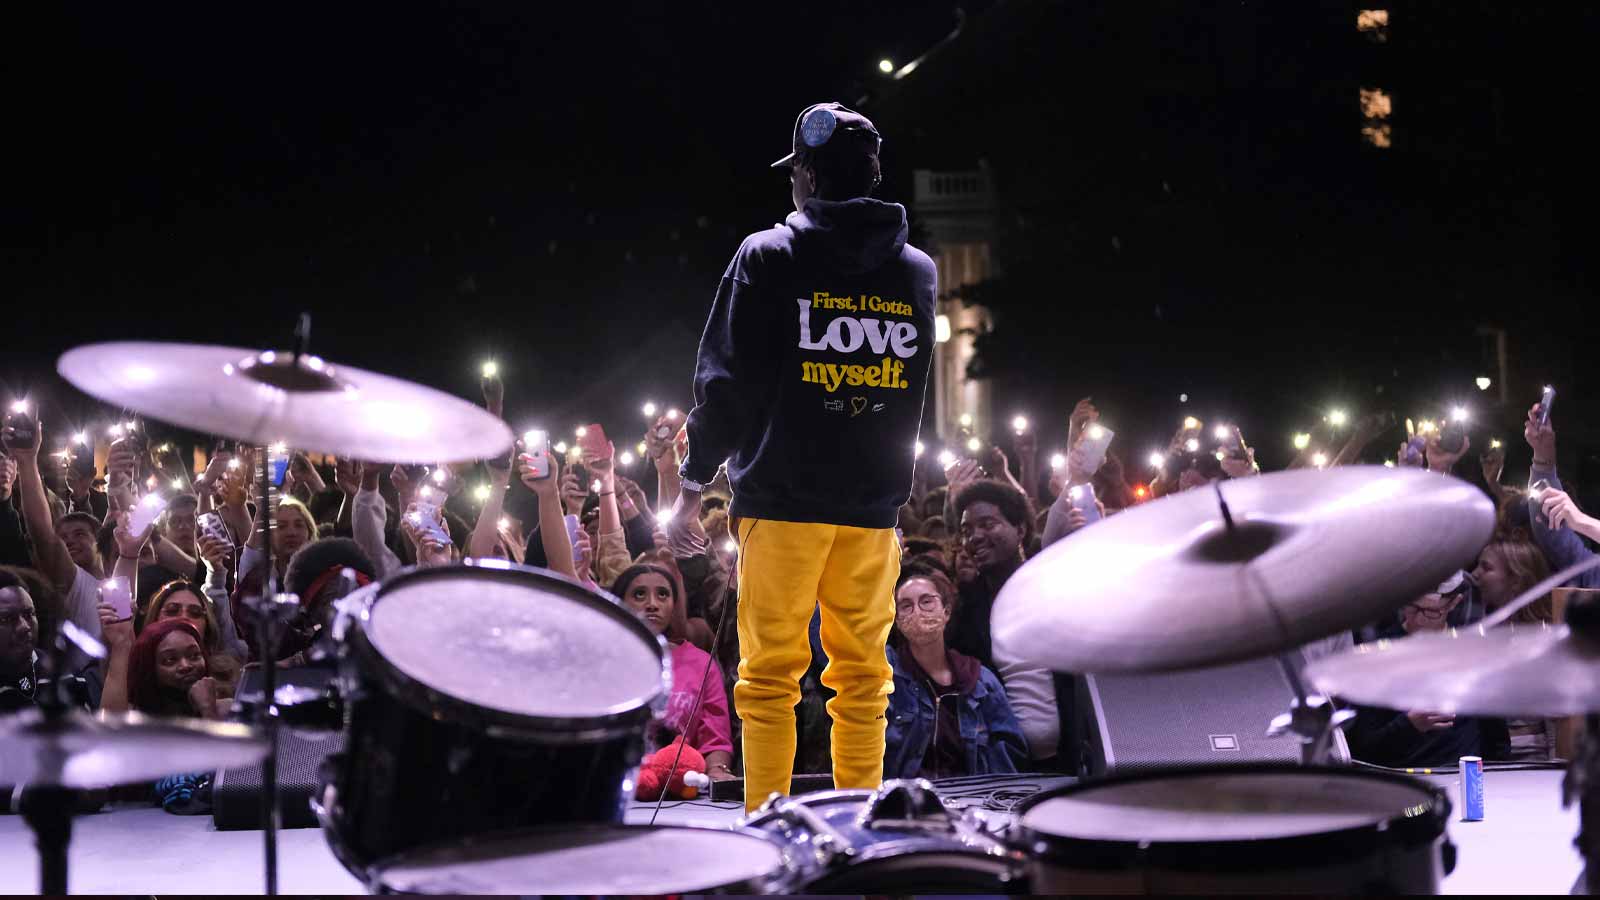 Image of a man on stage with and audience with their phone lights on